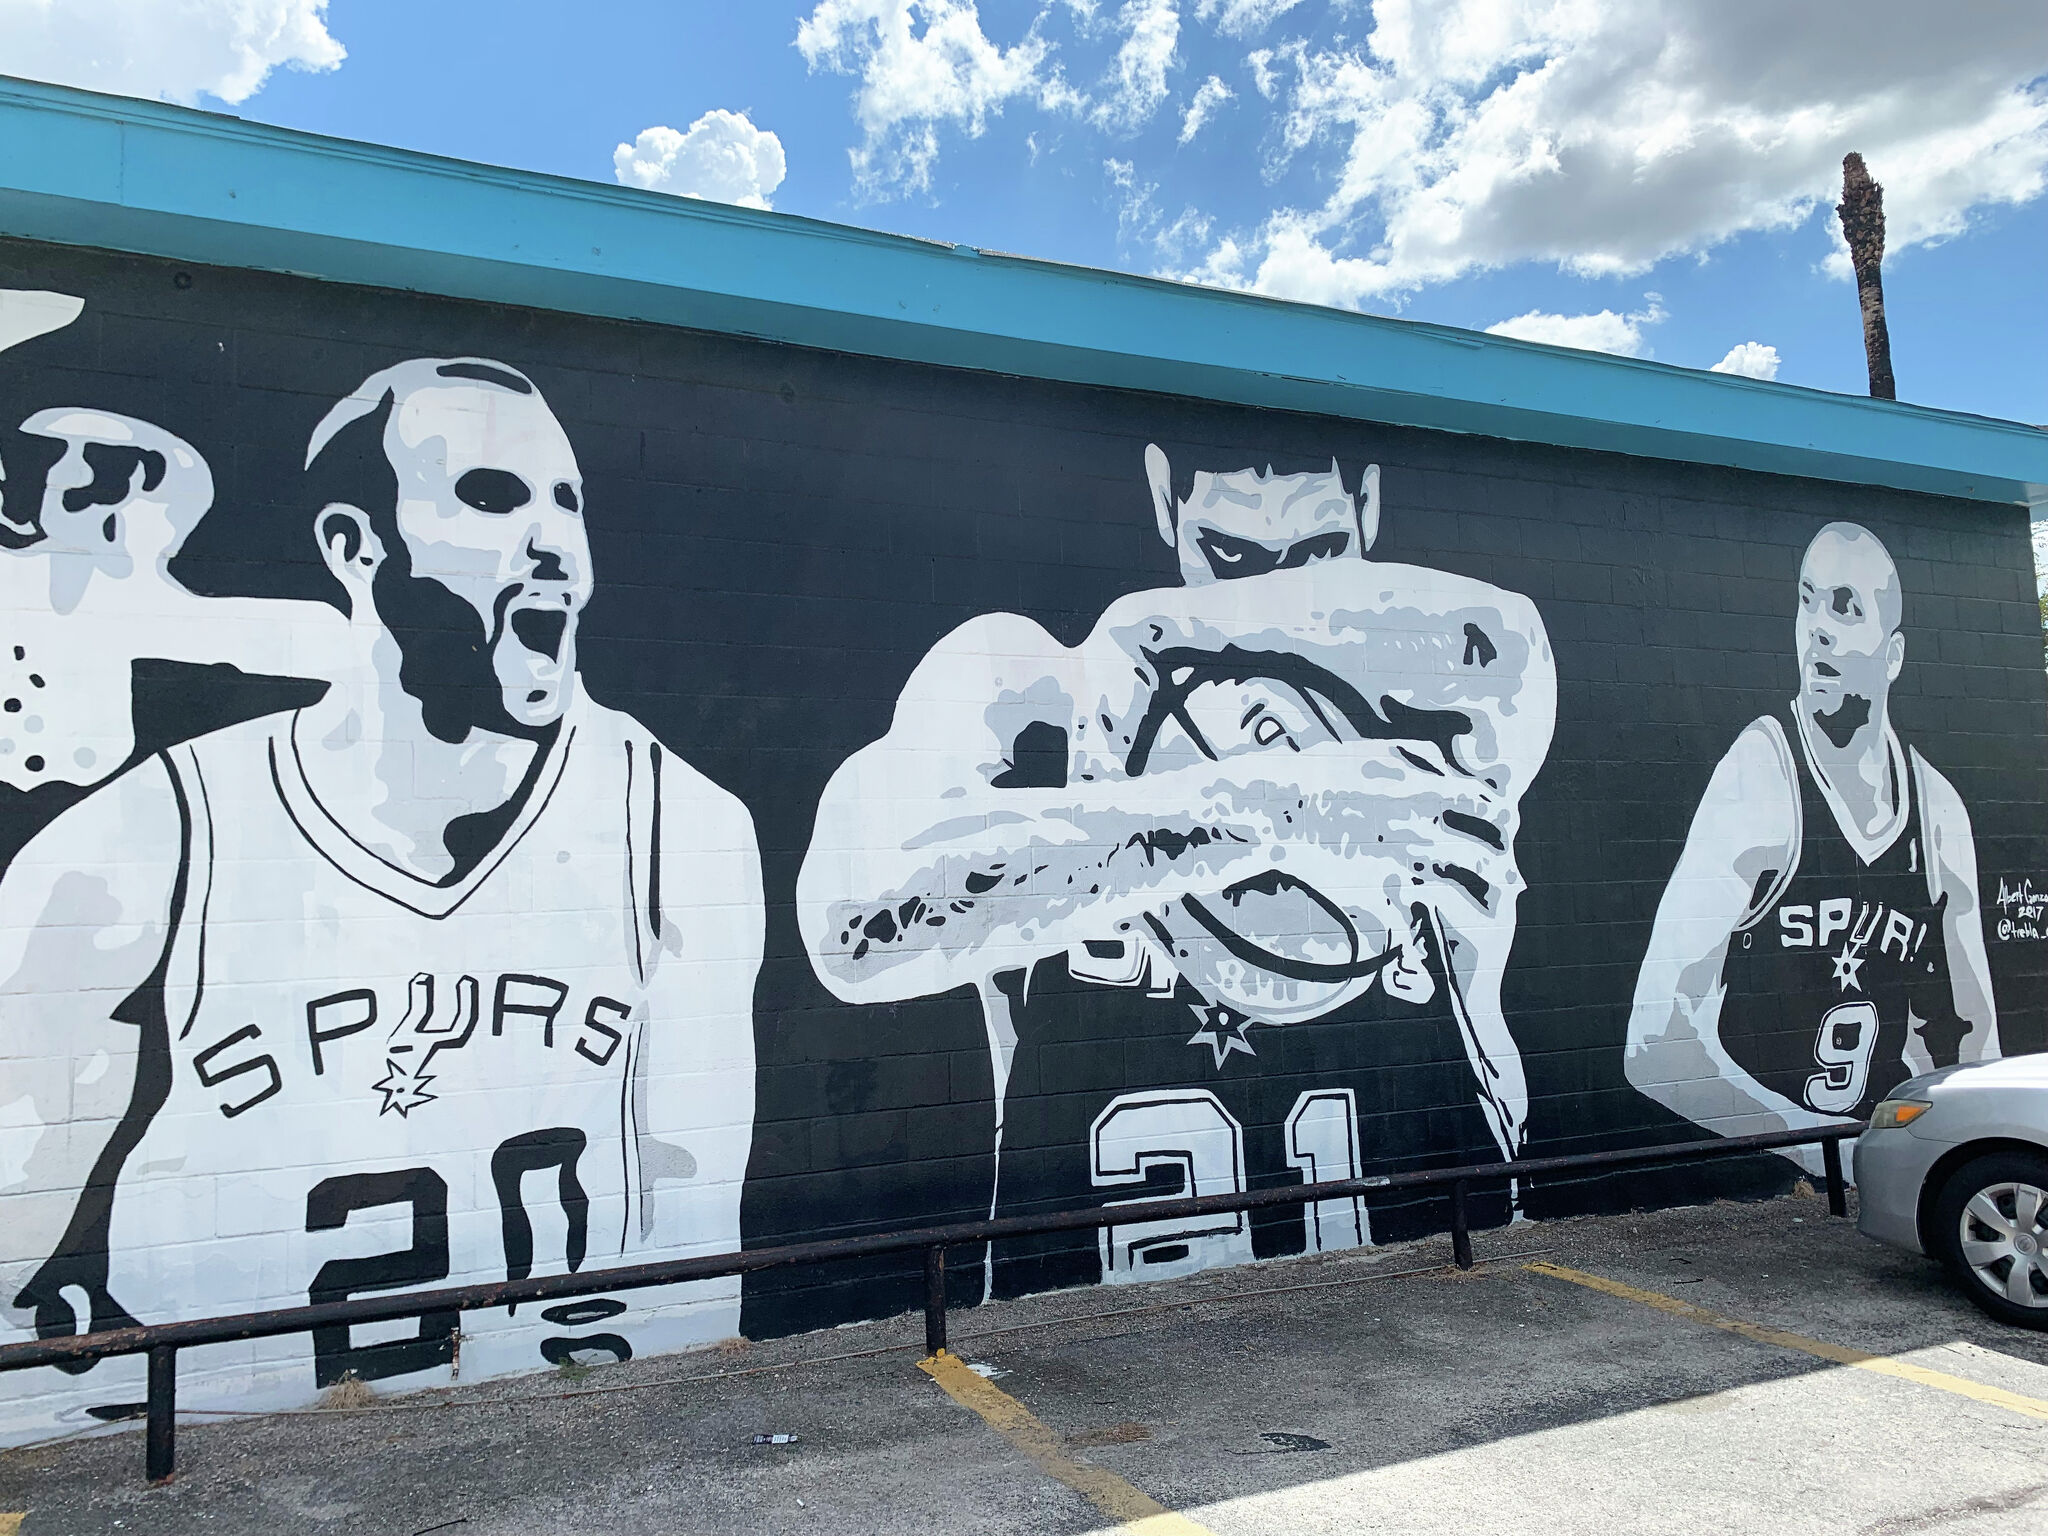 SAN ANTONIO SPURS ANNOUNCE SELF FINANCIAL AS THE NEW OFFICIAL